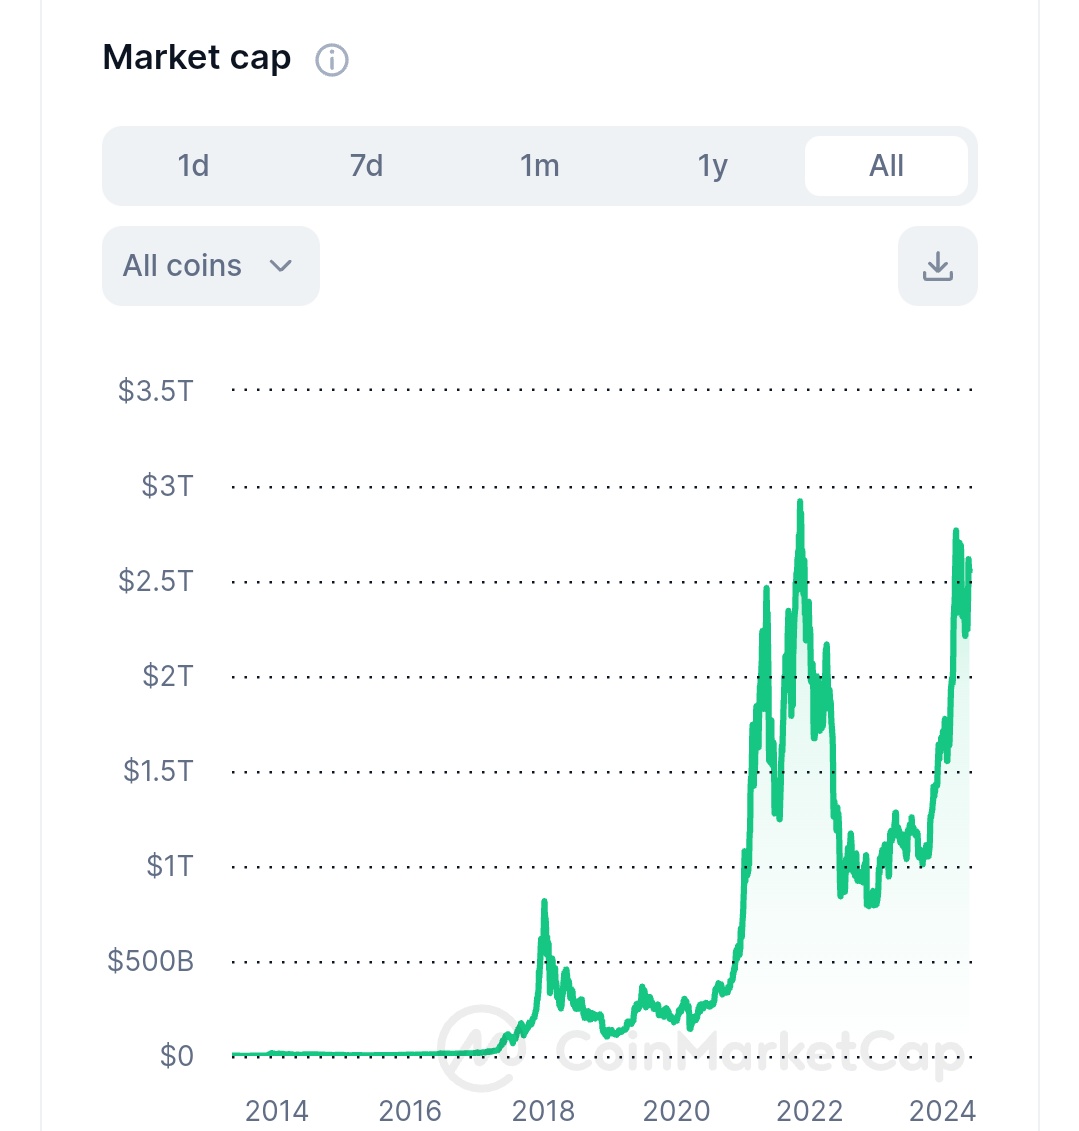 THE GLOBAL CRYPTO MARKETCAP, IS  REACHING A NEW ATH SOONER THAN WE THOUGHT.

BULLISH

Source: @CoinMarketCap